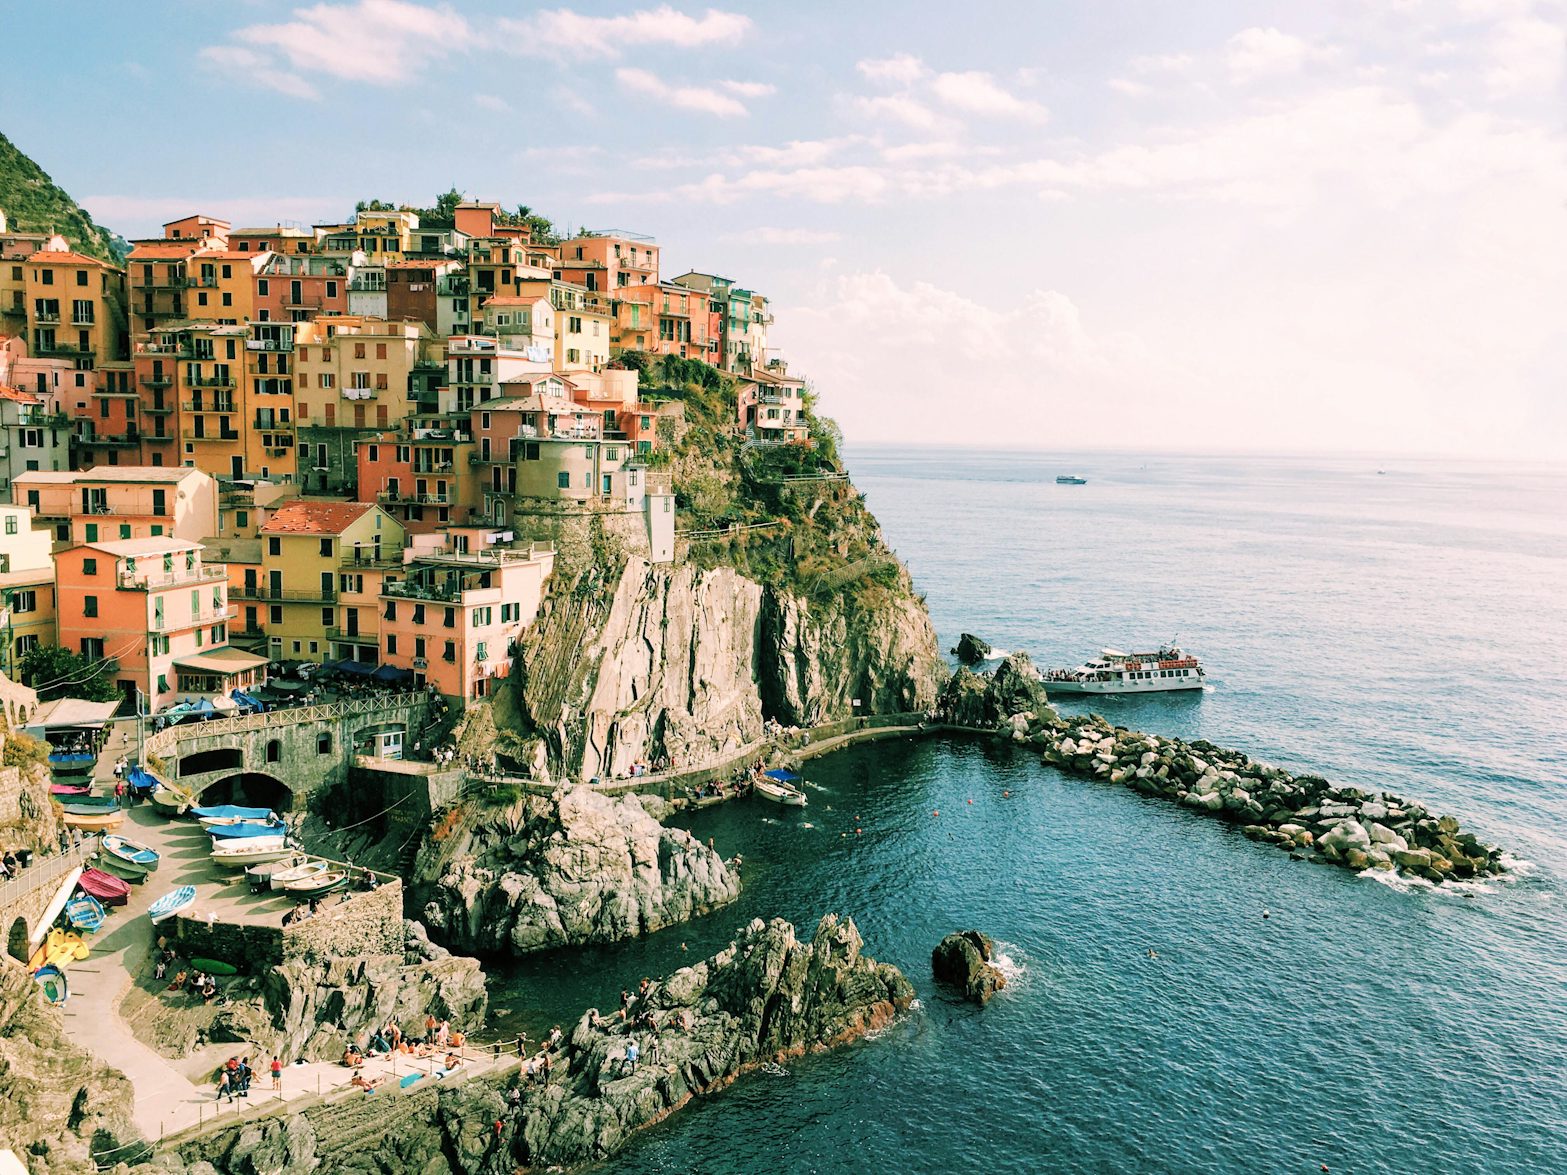 There is so much to see and do in Italy, it's almost impossible to keep track! Luckily for you, I've pulled together the Ultimate Italian Bucket List.